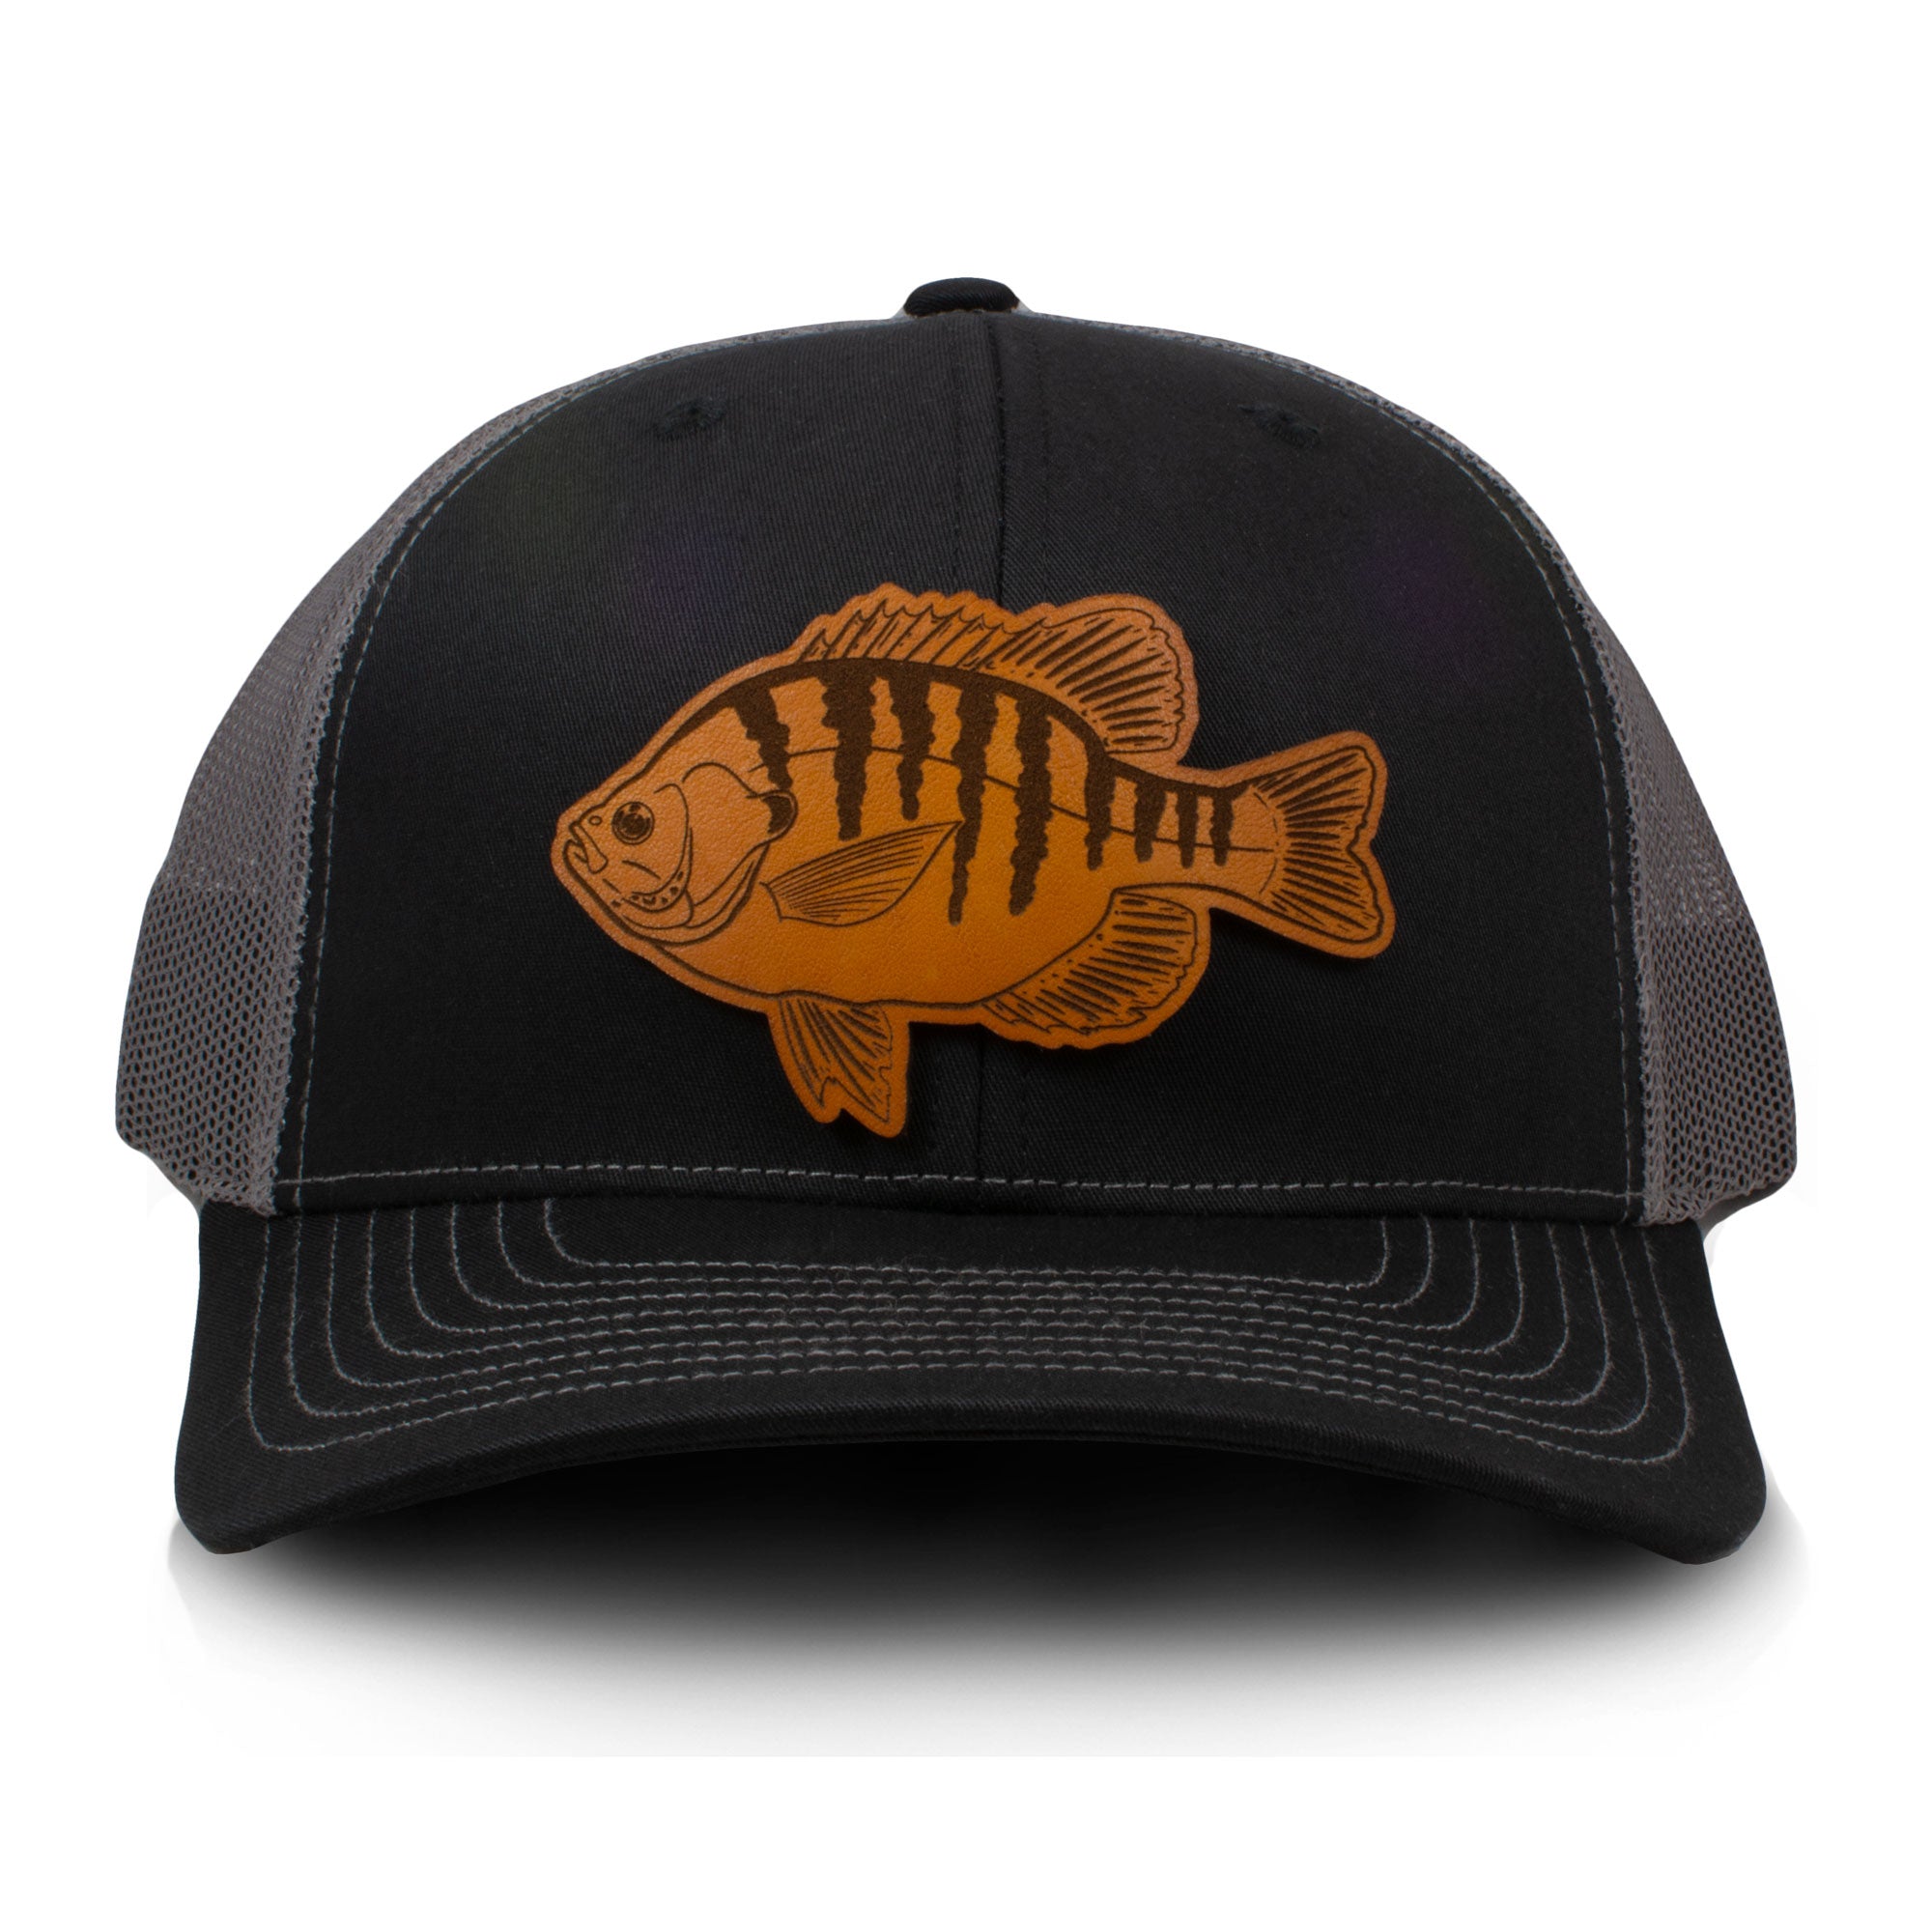 Bluegill Leather Patch Hat